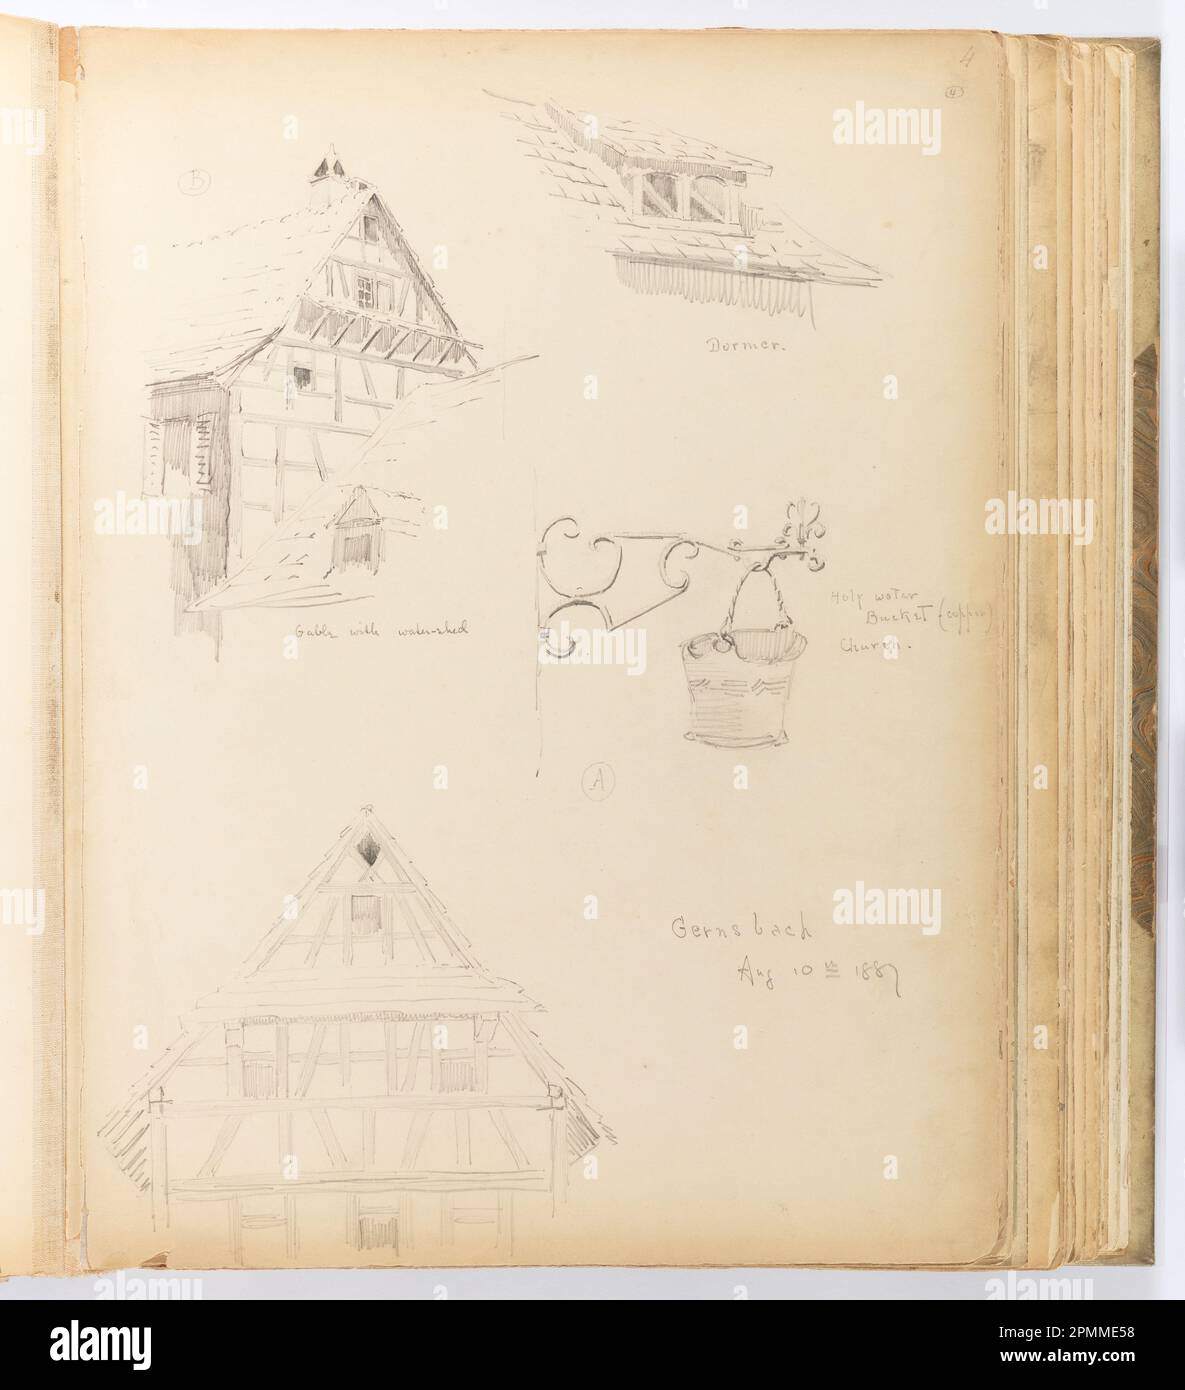 Album Page, Four Sketches: Gables, Dormer, and Holy Water Bucket, Gernsbach, Germany; Whitney Warren Jr. (American, 1864–1943); Germany; graphite on cream paperboard tipped into binding with fabric; 31.8 x 23.9 cm (12 1/2 x 9 7/16 in.), irregular Stock Photo